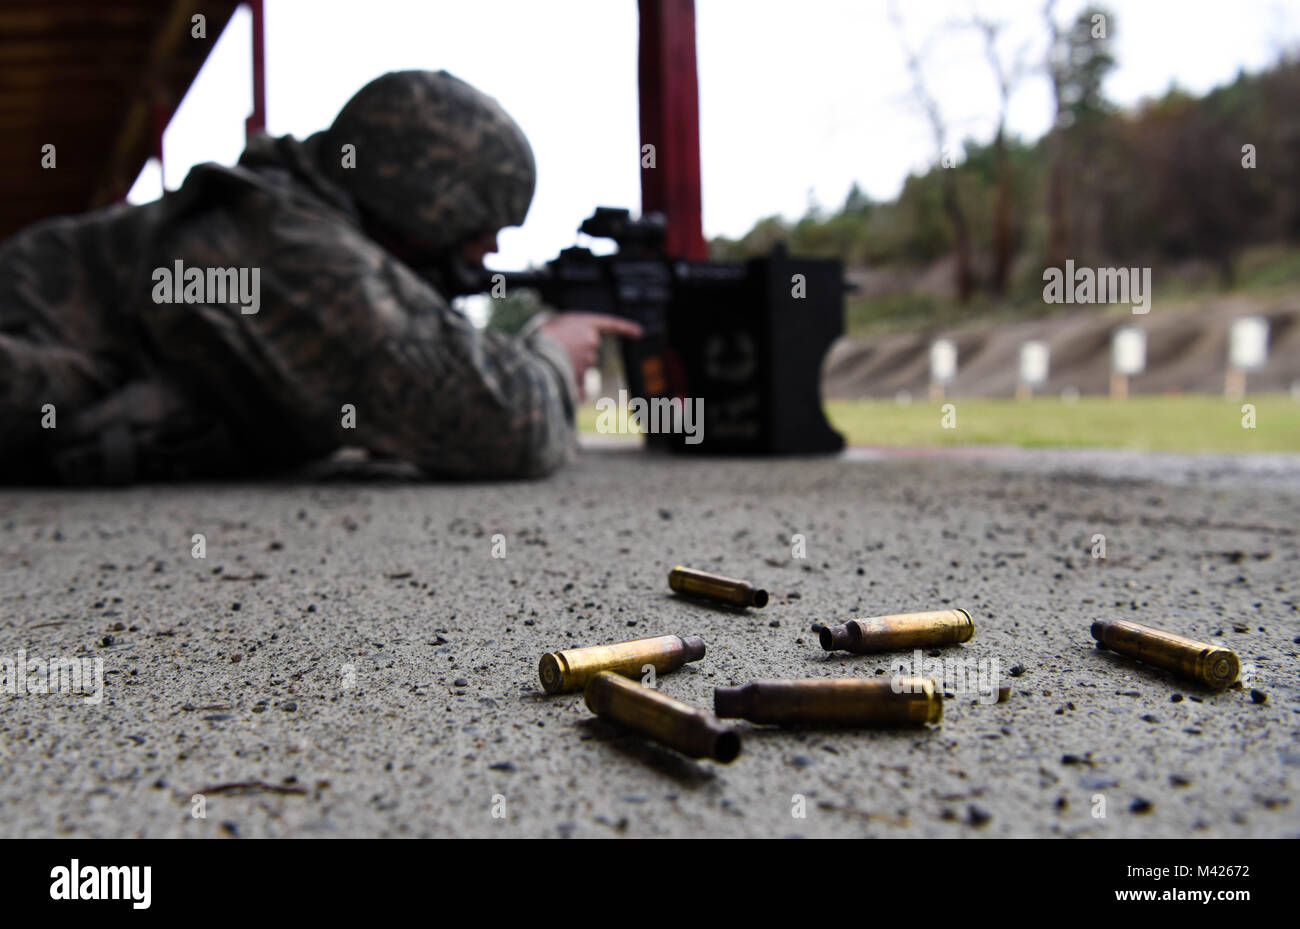 Shell casings from an M-4 carbine lay on the ground during the 627th Security Forces Squadron’s Combat Arms Training and Maintenance (CATM) class at Joint Base Lewis-McChord, Wash., Jan. 31, 2018. Team McChord Airmen undergoing CATM fired practice rounds where they could receive coaching from instructors before firing for their qualification. (U.S. Air Force photo by Senior Airman Tryphena Mayhugh) Stock Photo